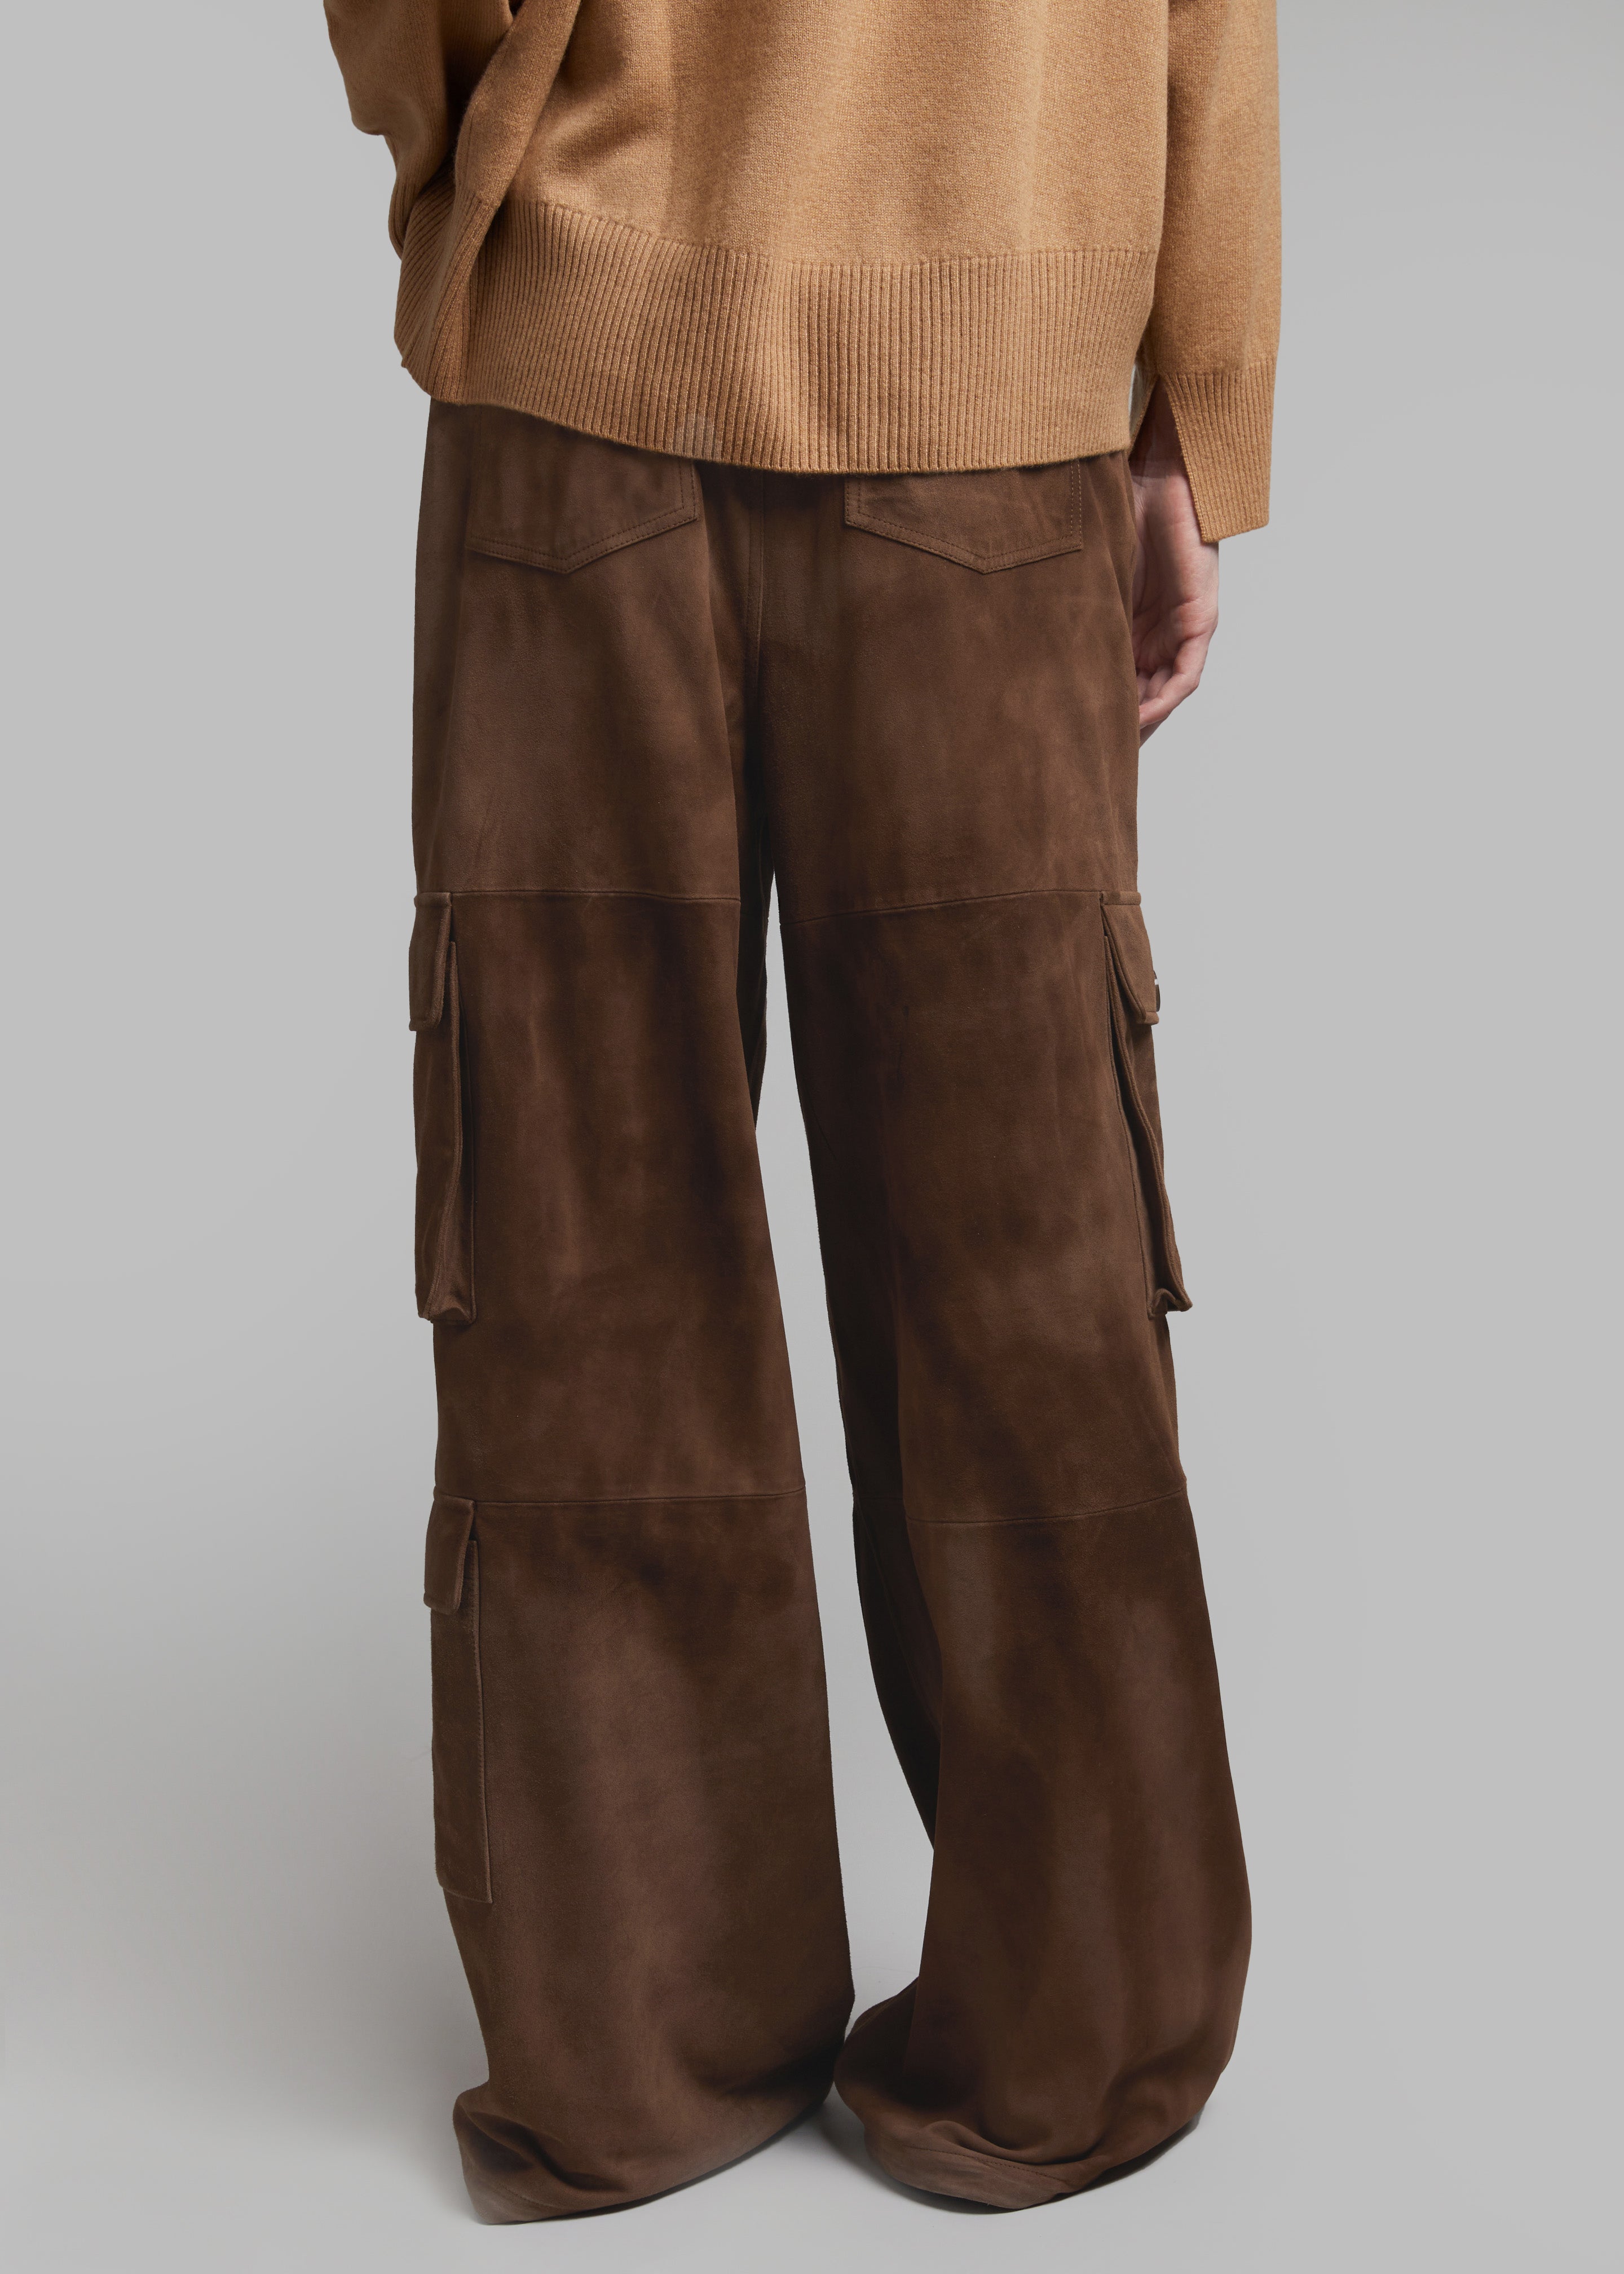 Hailey Suede Oversized Cargo Pants - Brown - 6